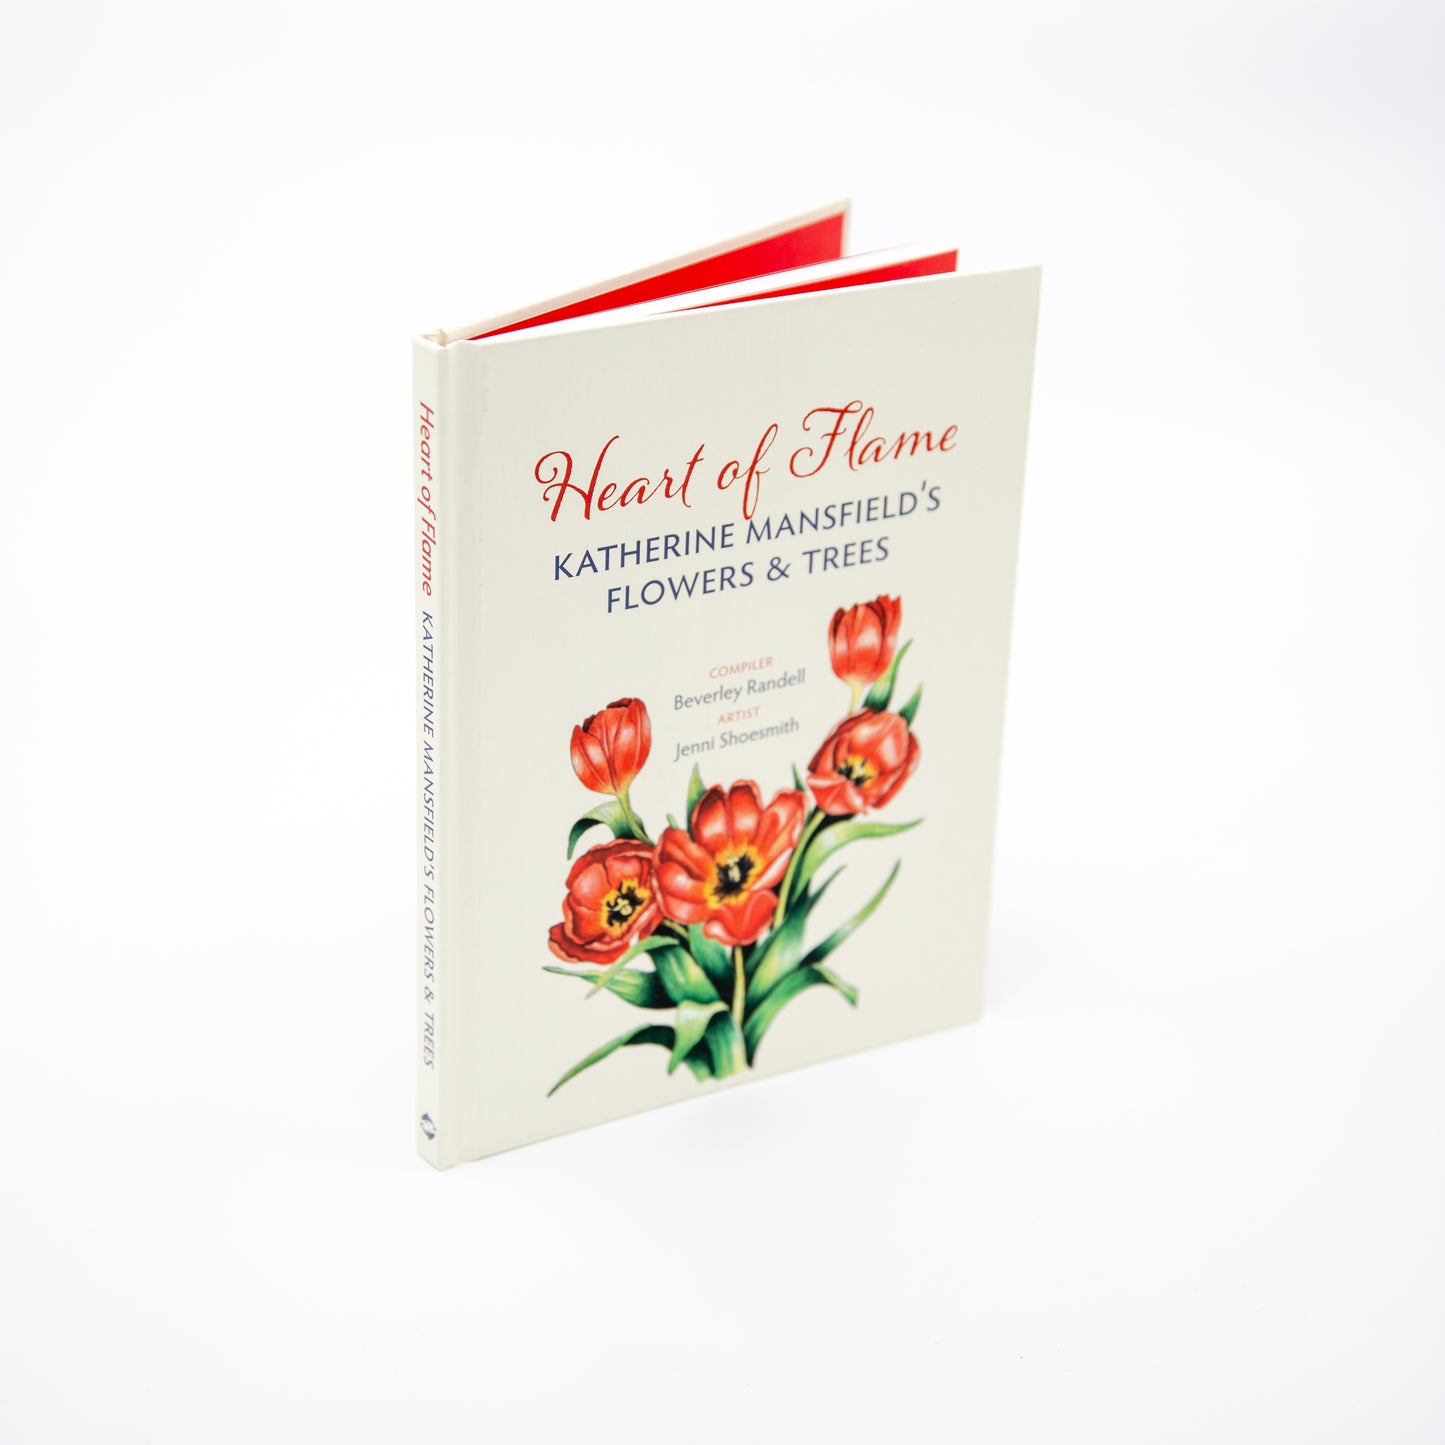 Heart of Flame - Katherine Mansfield's Flowers & Trees